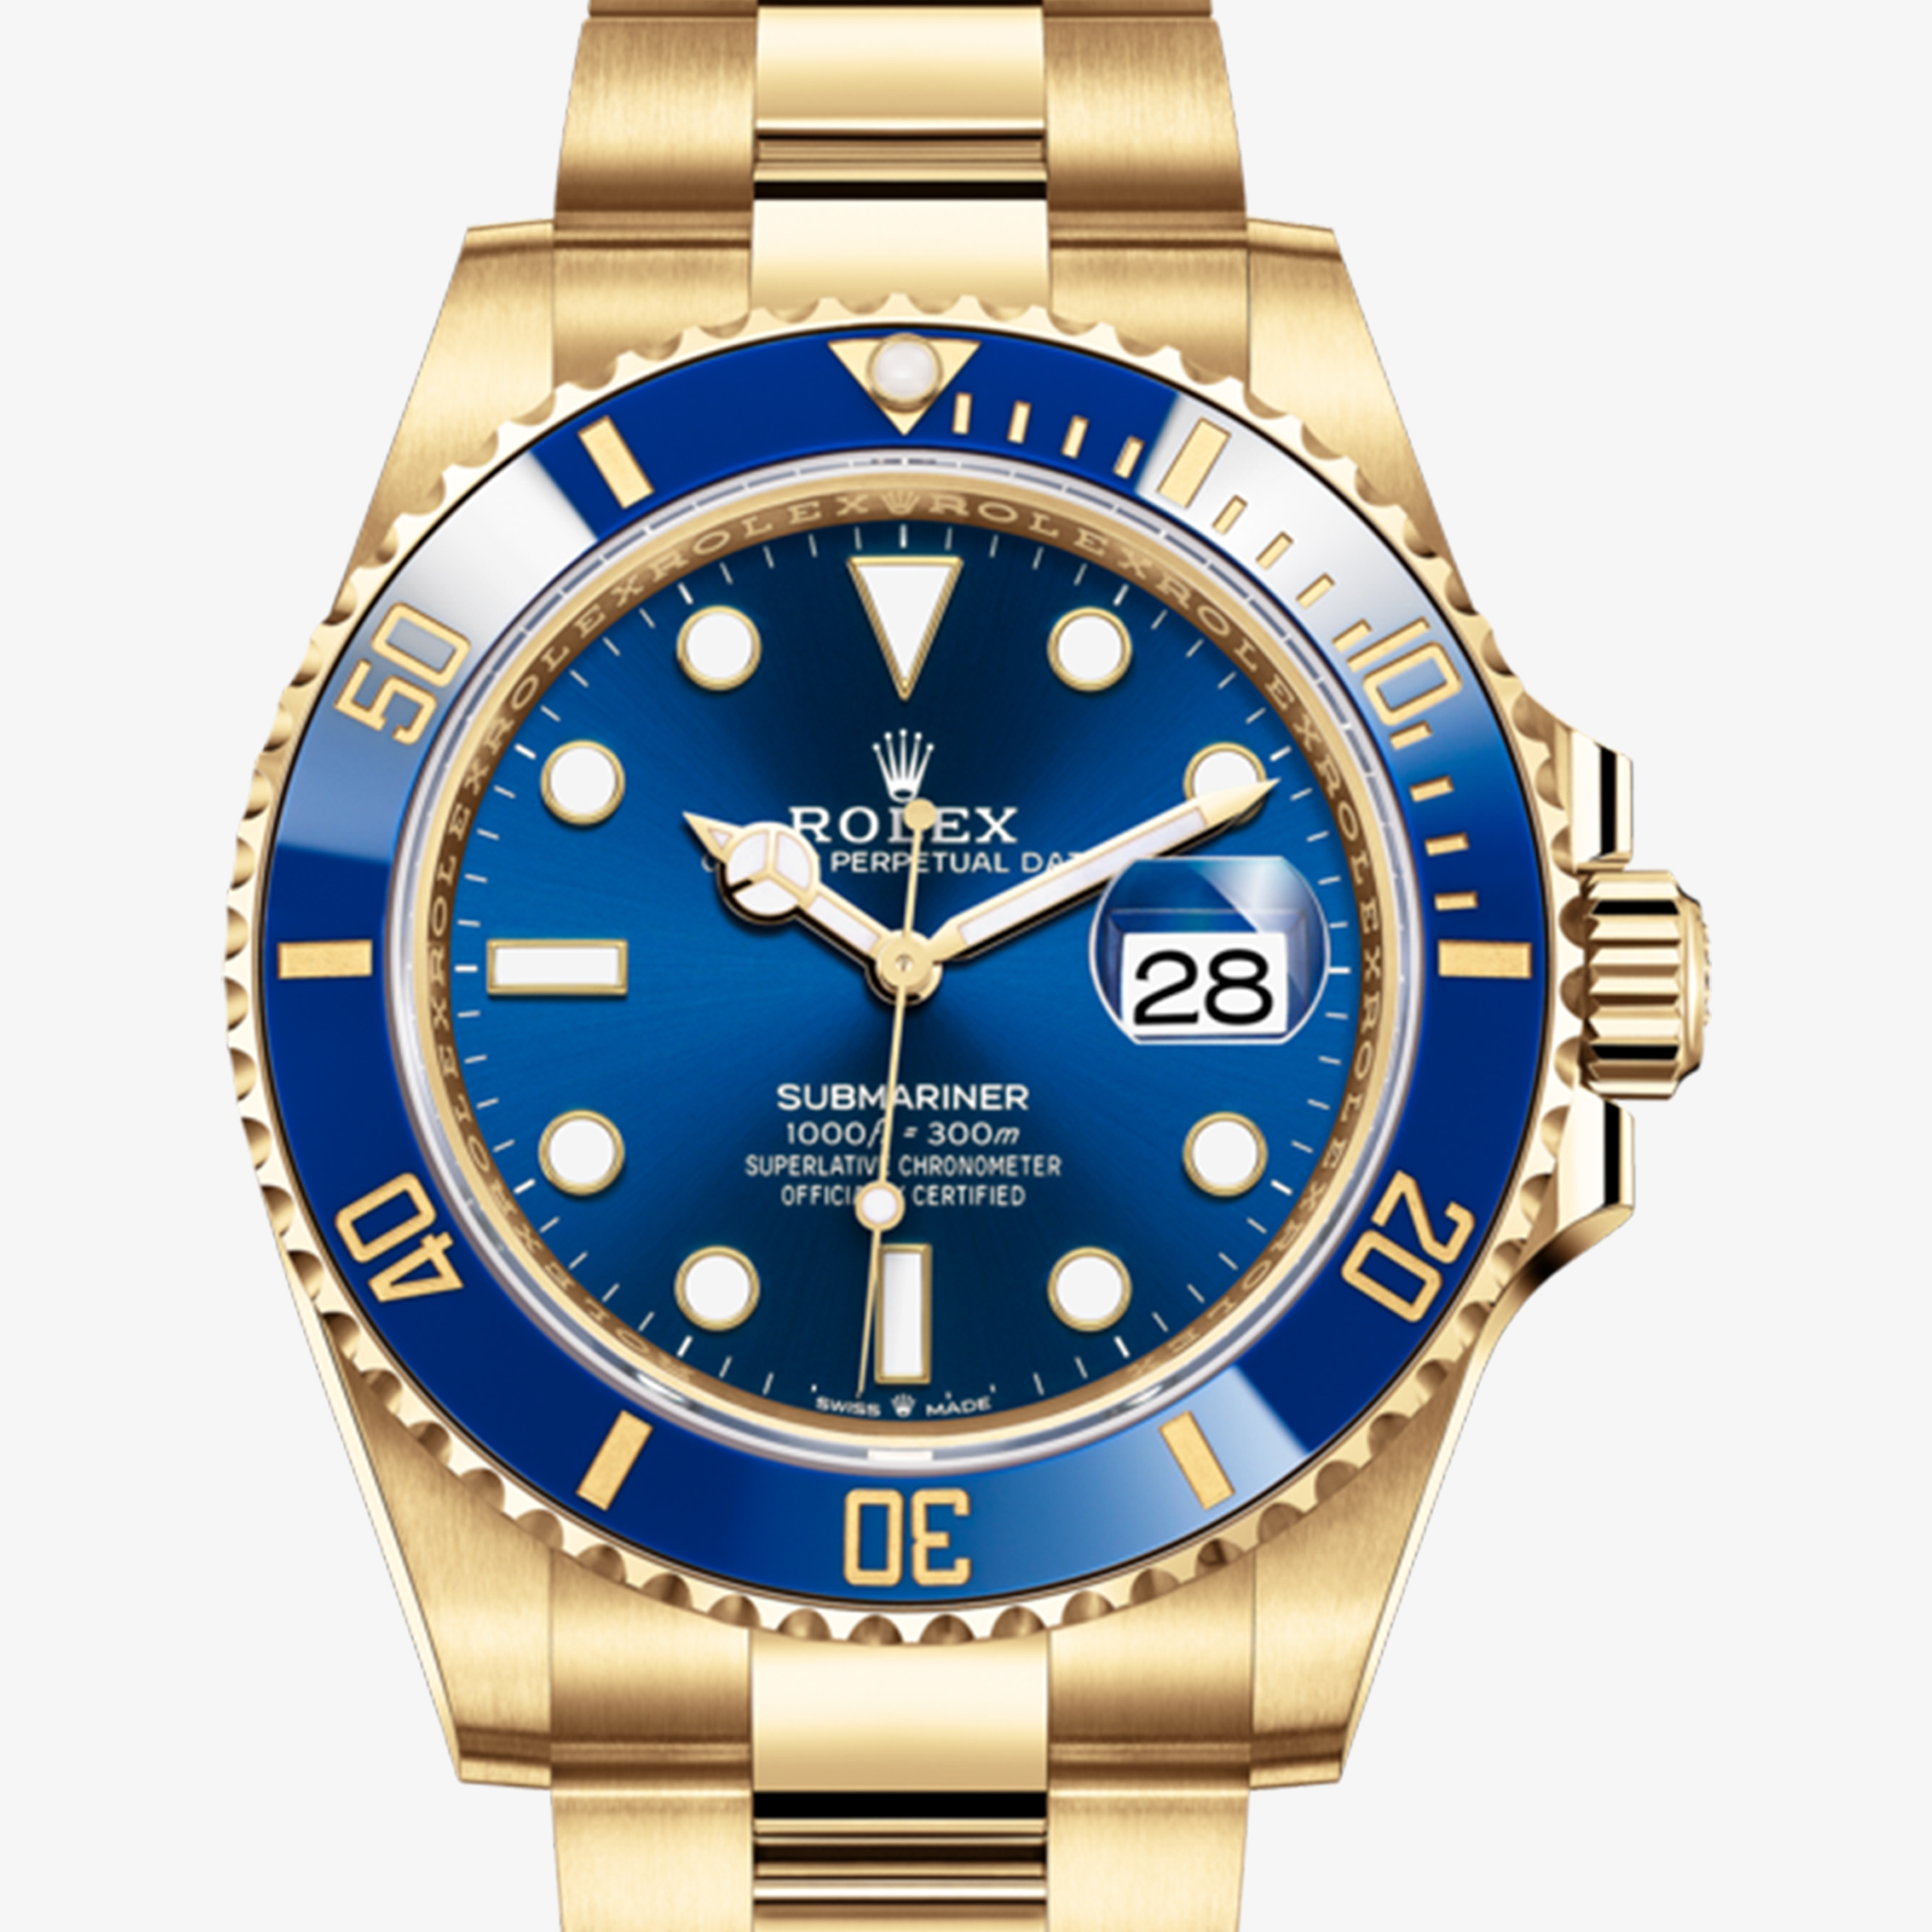 Rolex Submariner Oyster, 41 mm, yellow gold M126618LB0002 Submariner